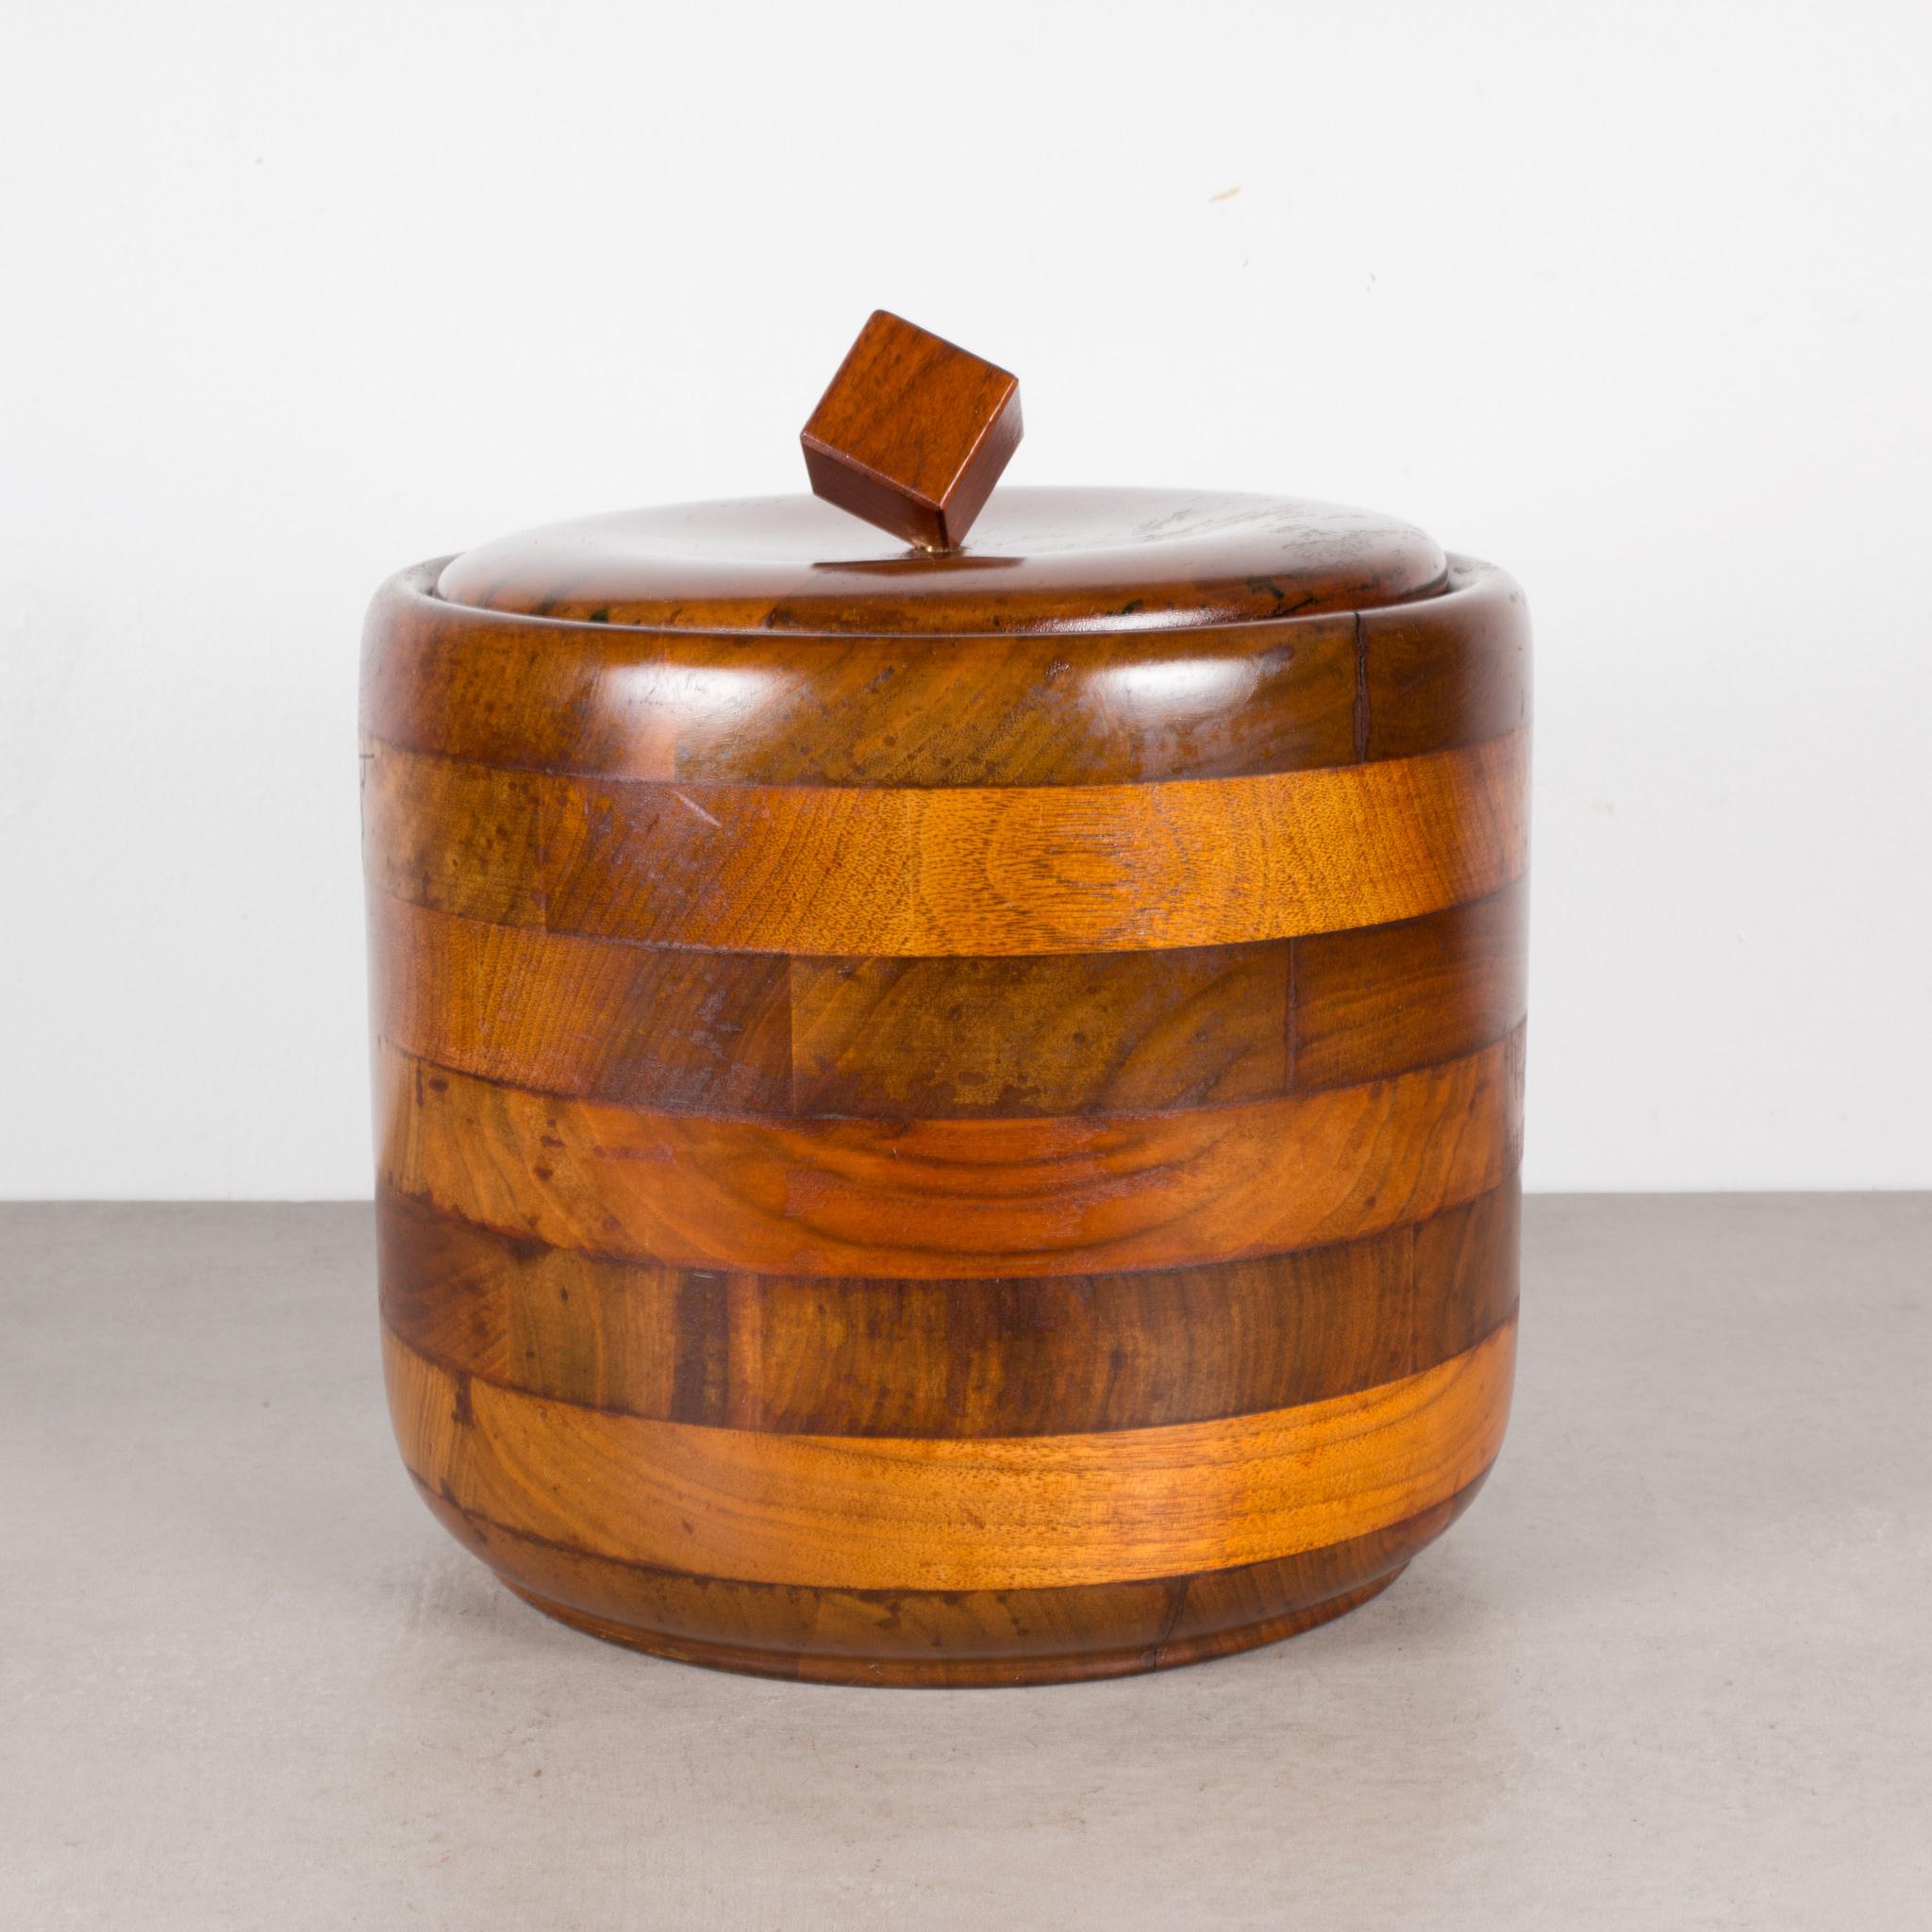 ABOUT

An original mid-century solid Walnut ice bucket with thick silver glass Pyrex insert.

 CREATOR Unknown.
 DATE OF MANUFACTURE c.1950-1960.
 MATERIALS AND TECHNIQUES Solid Walnut, Glass.
 CONDITION Good. Wear consistent with age and